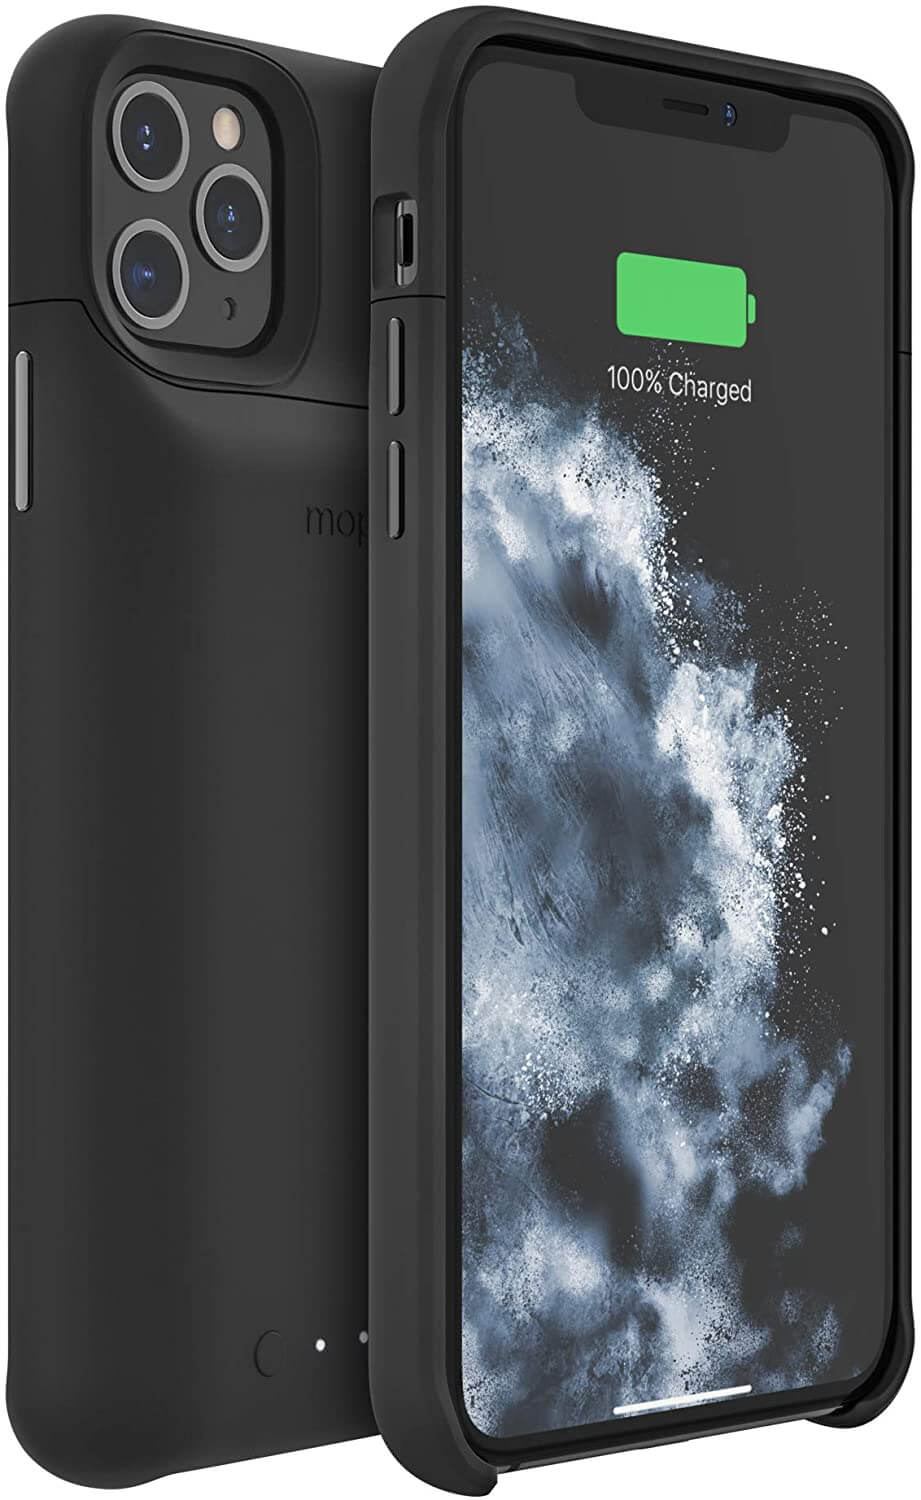 Steve Blum recommends Mophie Juice Pack charging case for iPhone 11 Pro Max